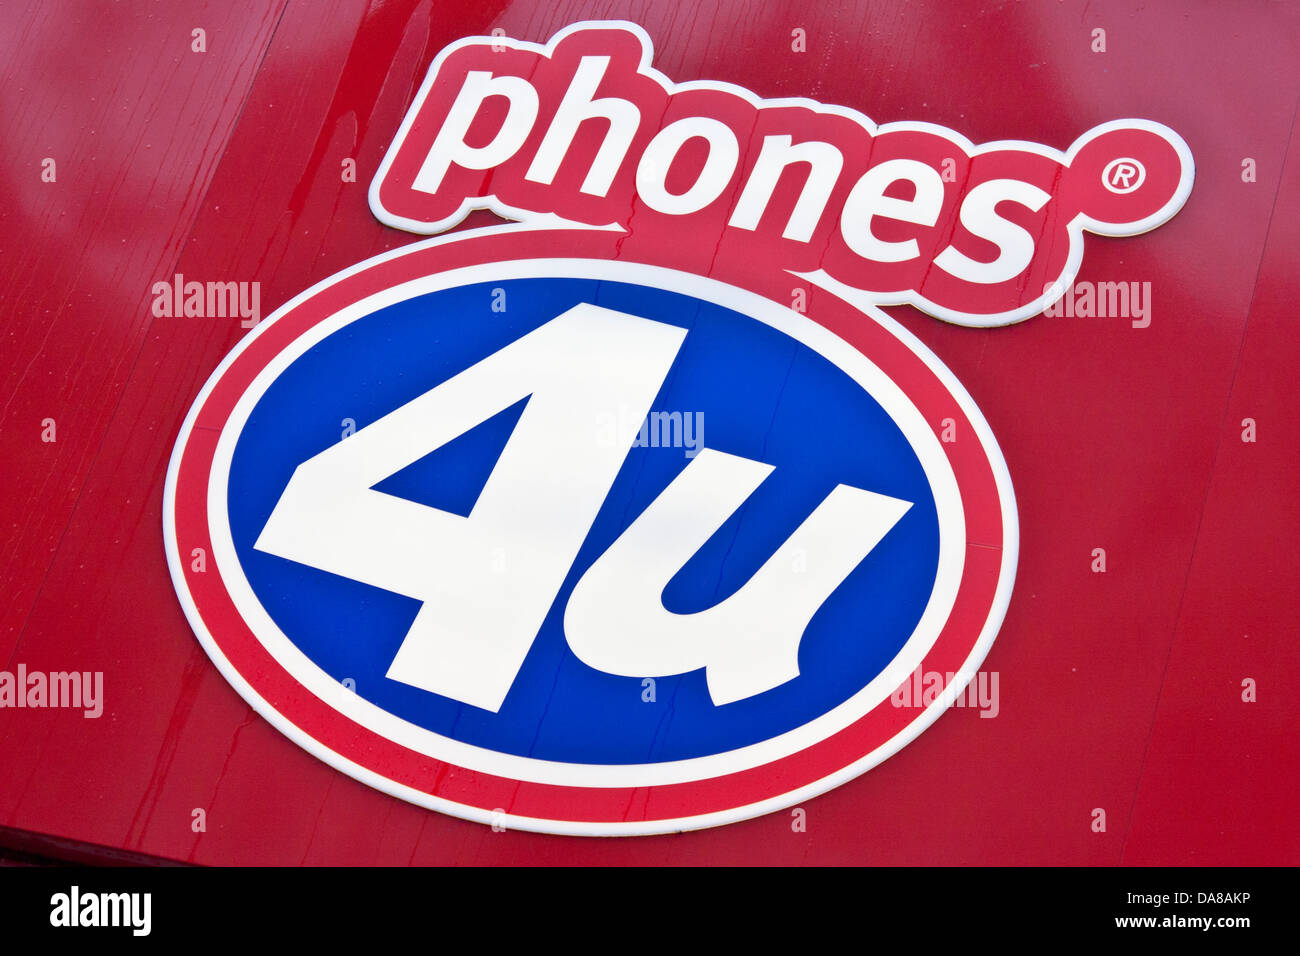 Phones 4 u logo on hoarding above mobile phone retailer outlet Stock Photo